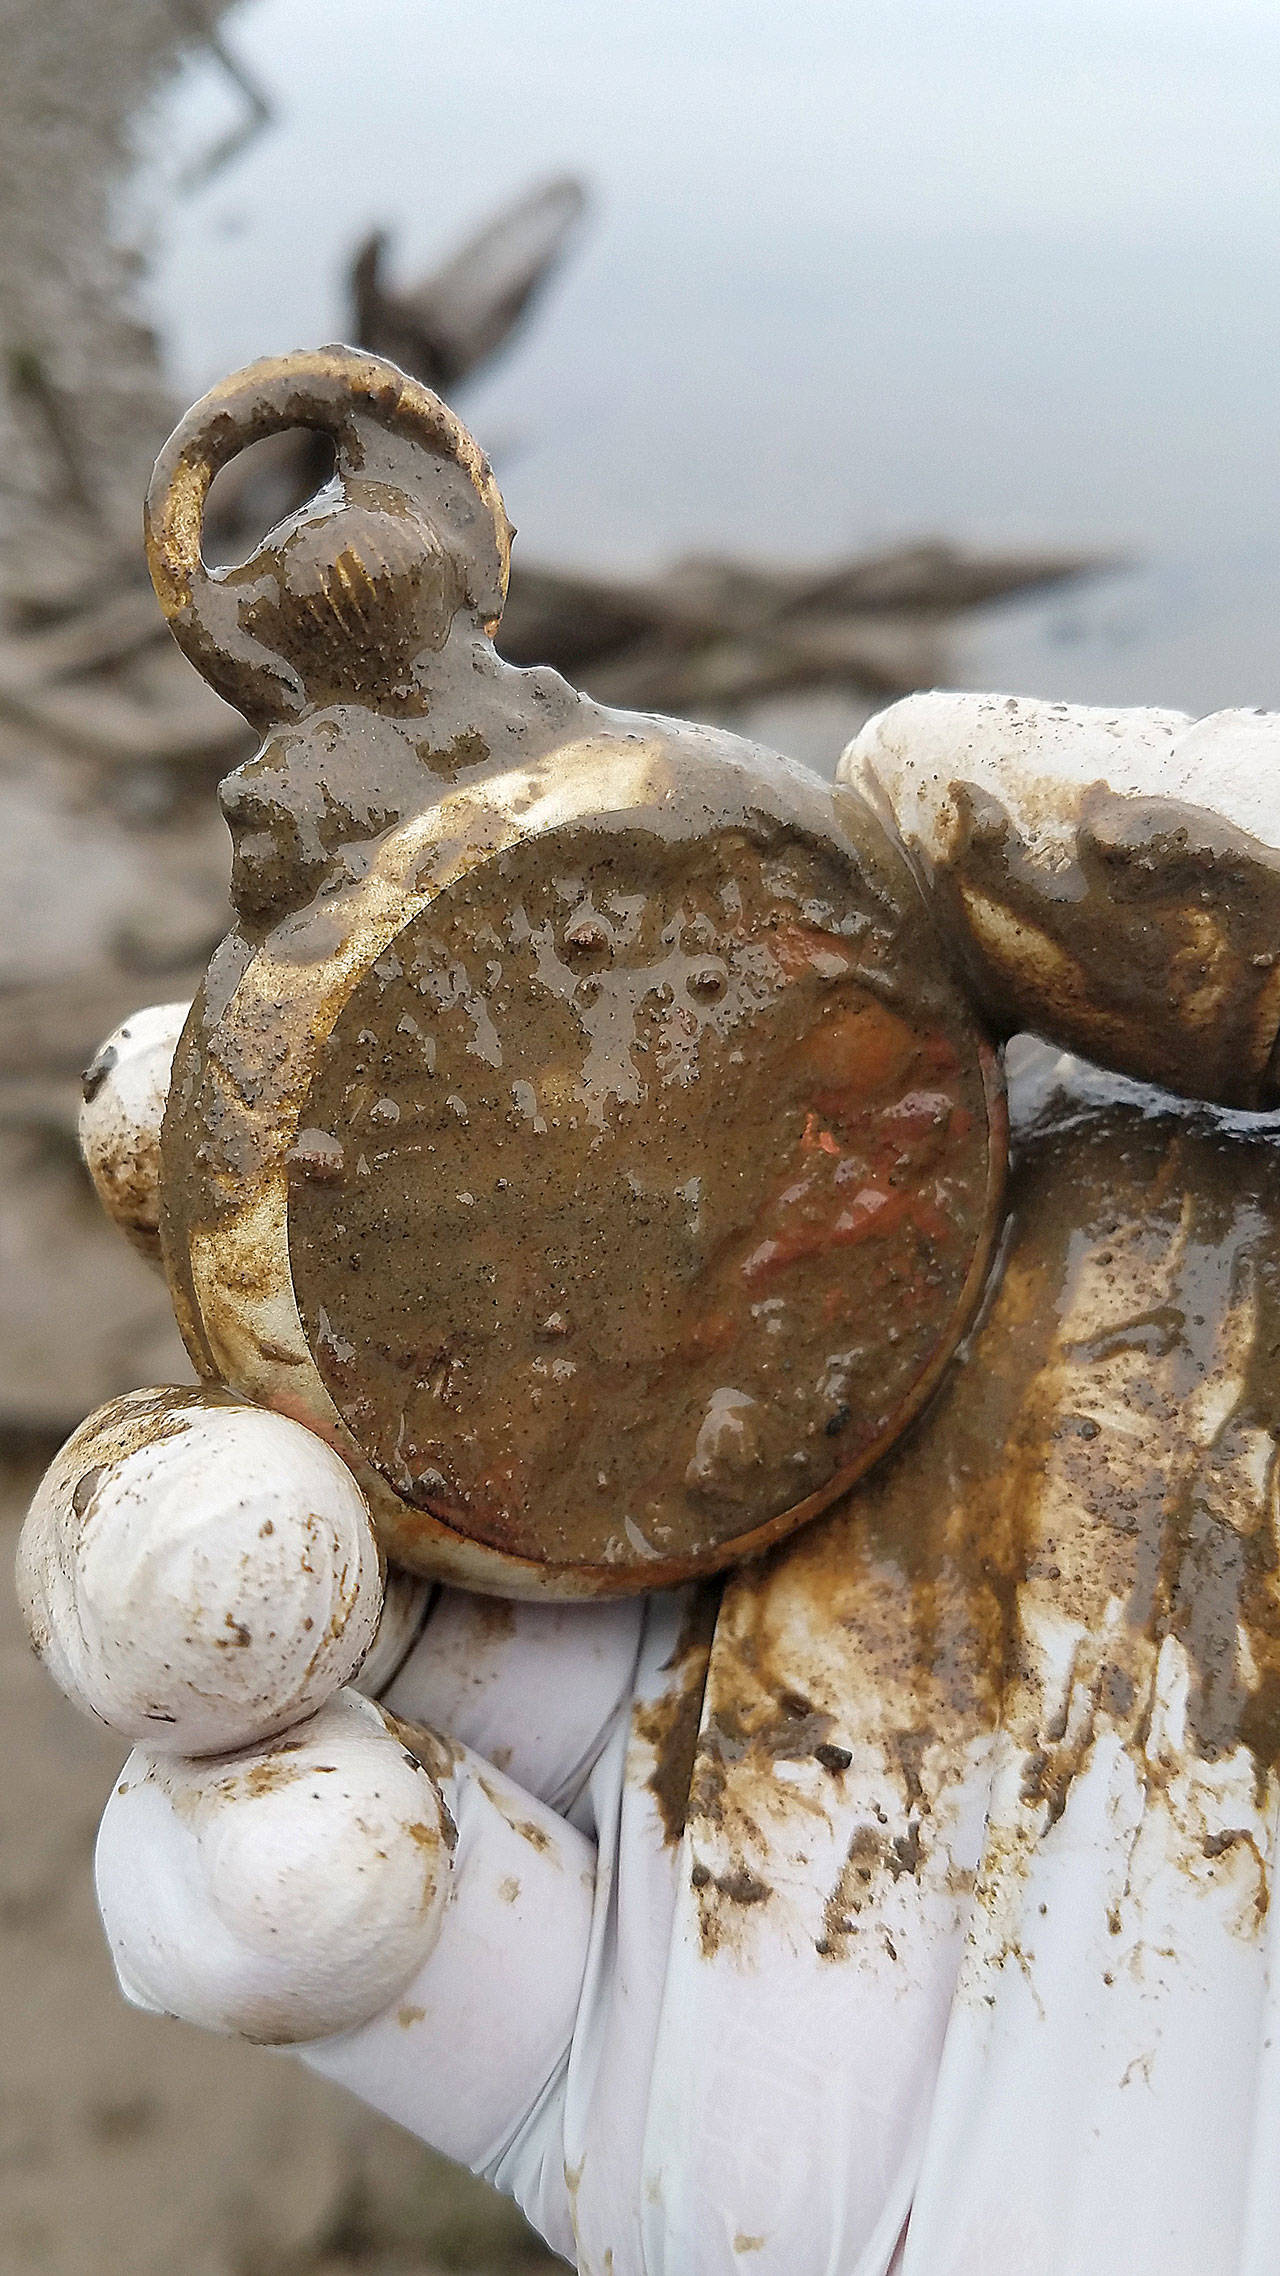 Photo by Marcy Merrill
North Cove photographer and artist Marcy Merrill leads “mudlarking” outings at the mouth of the Chehalis River, where she has discovered a plethora of artifacts.